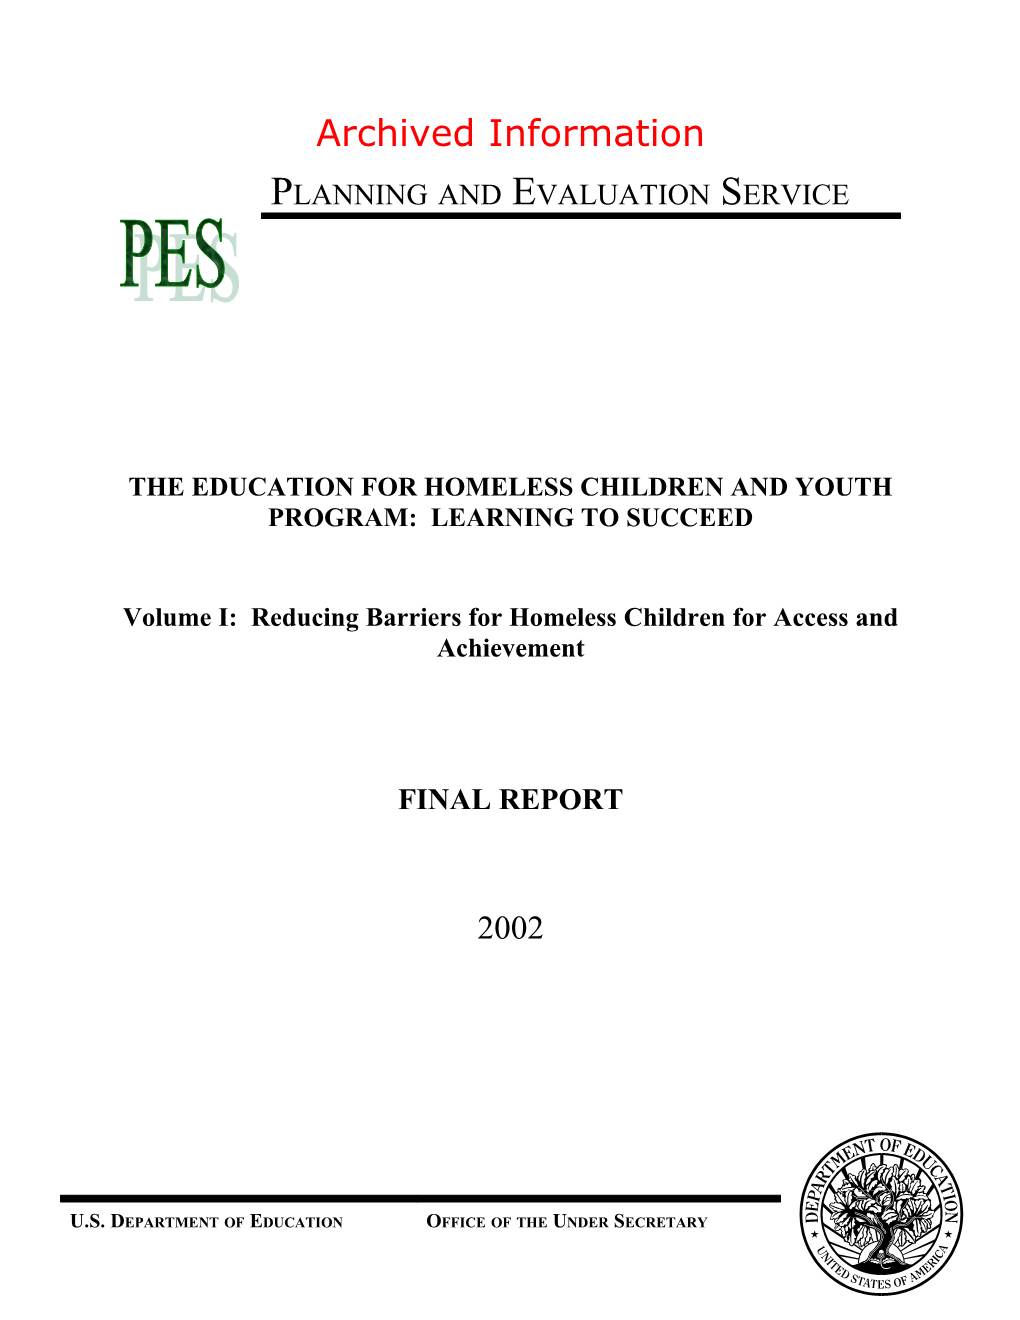 Archived: the Education for Homeless Children and Youth Program: Learning to Succeed s1